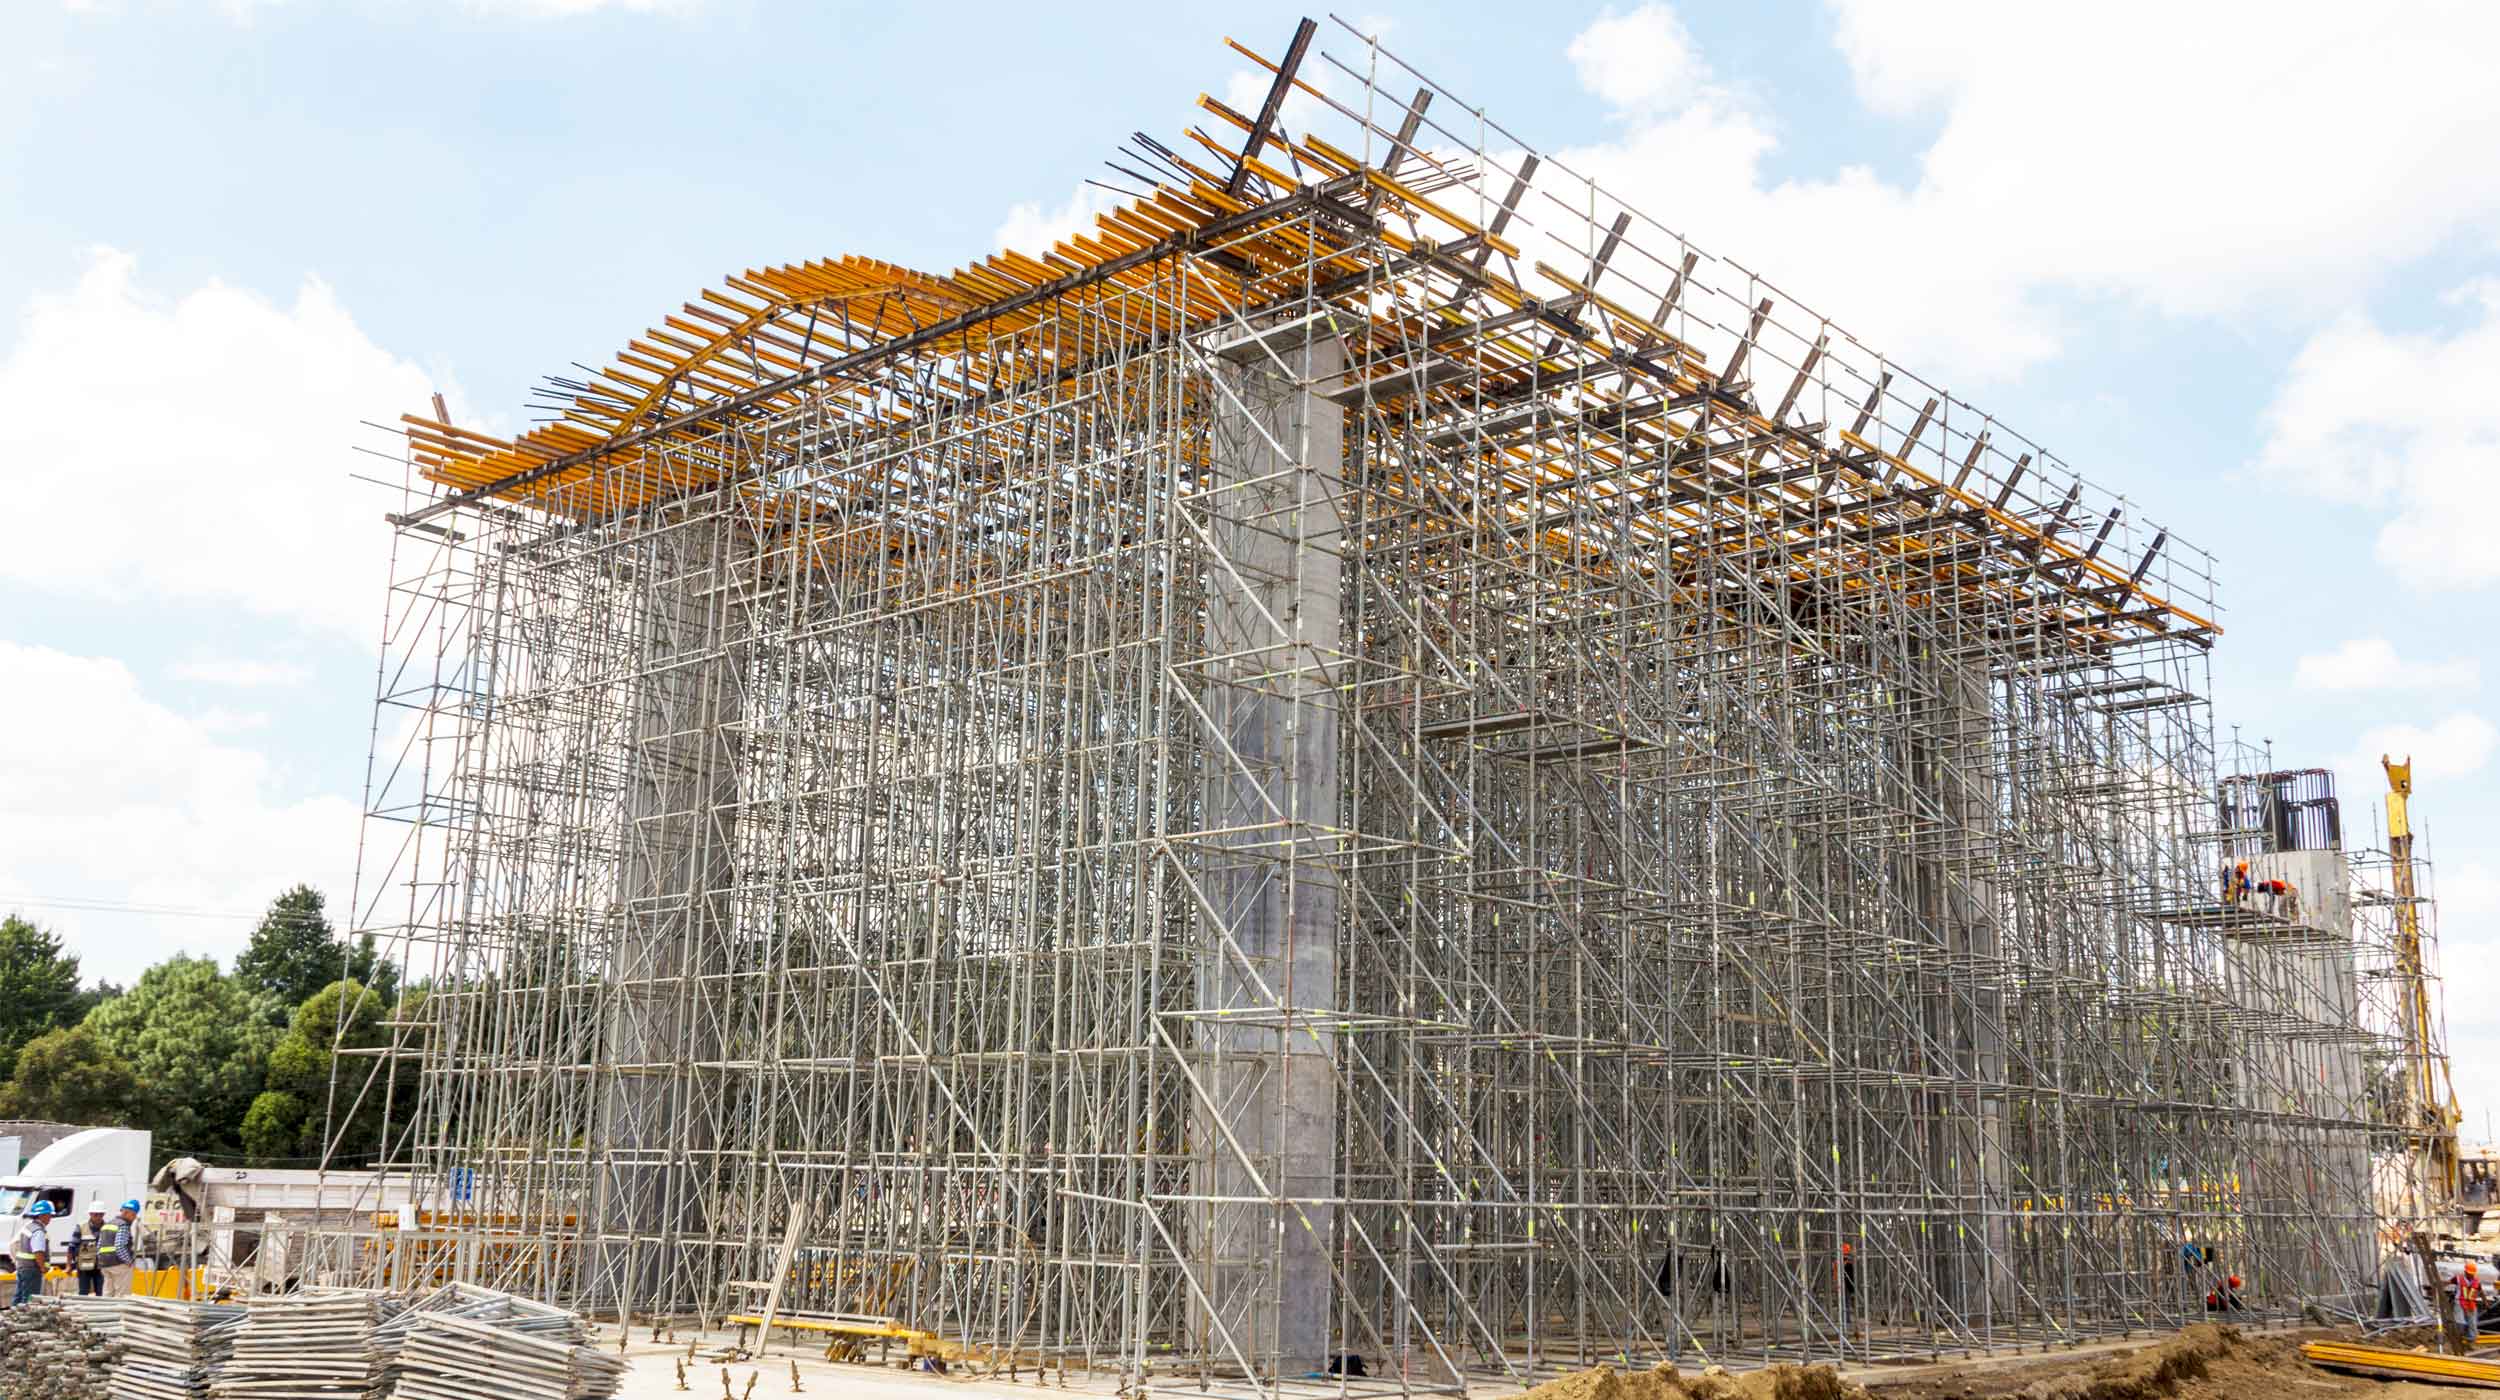 The versatility of our formwork structures provided a solution both profitable for our client and efficient for the construction of the octagonal piers required.